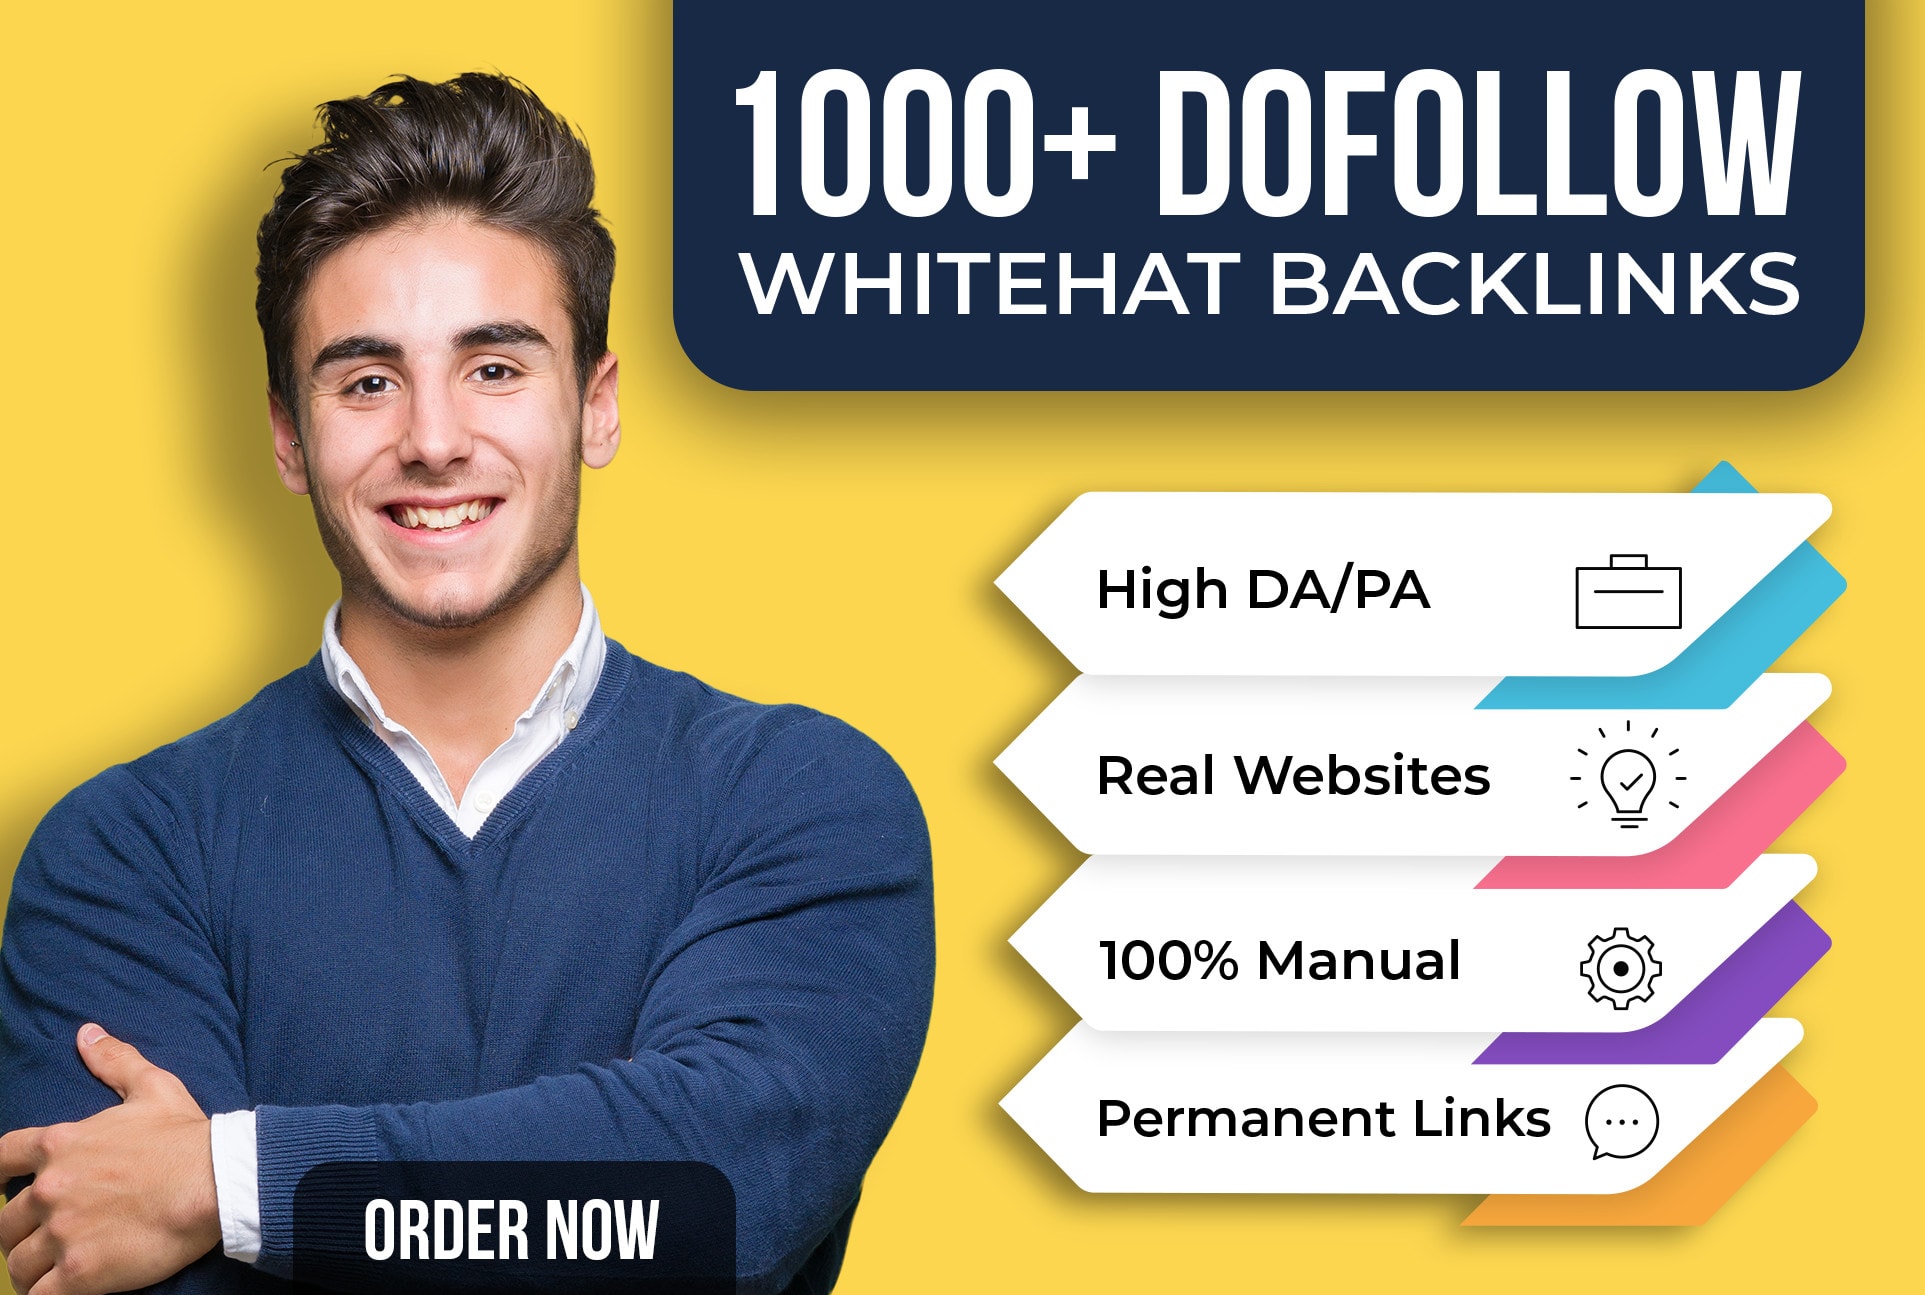 23968build SEO dofollow backlinks with high quality contextual link building